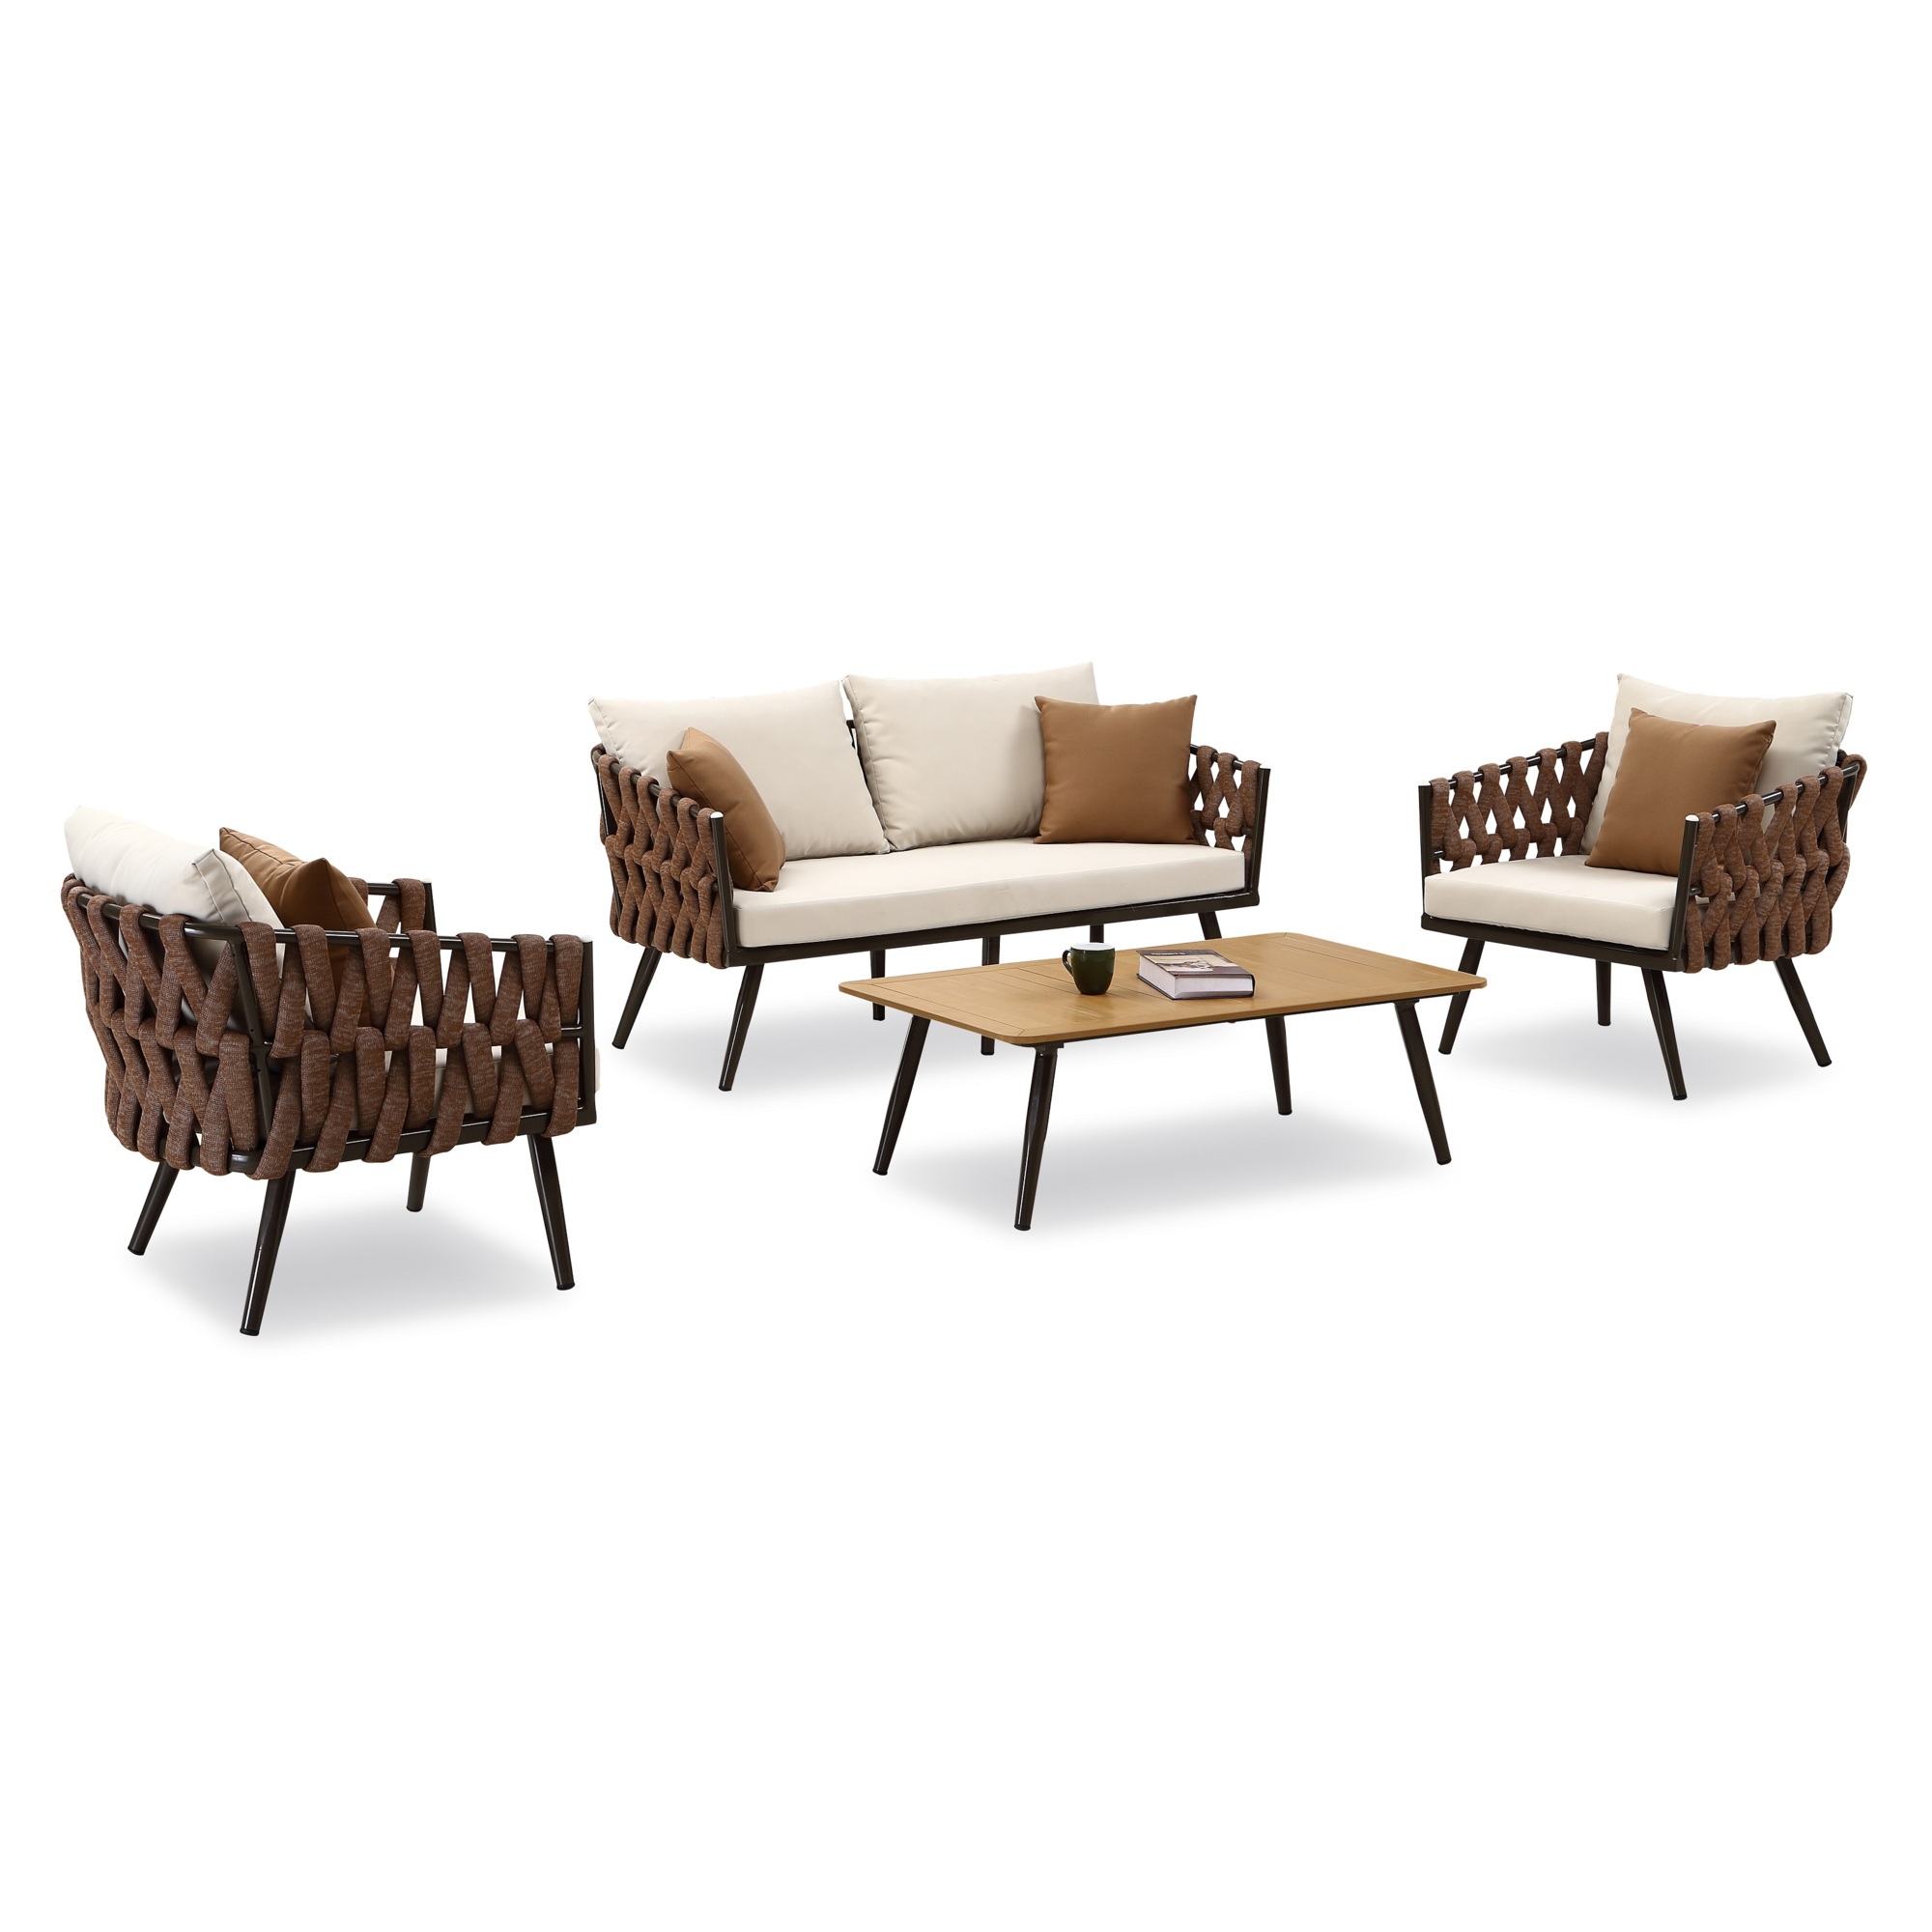 Manhattan Comfort, Crown 4Pc Metal Patio Conv Set Brown White Cushion, Pieces (qty.) 4 Primary Color White, Seating Capacity 4 Model OD-CV004